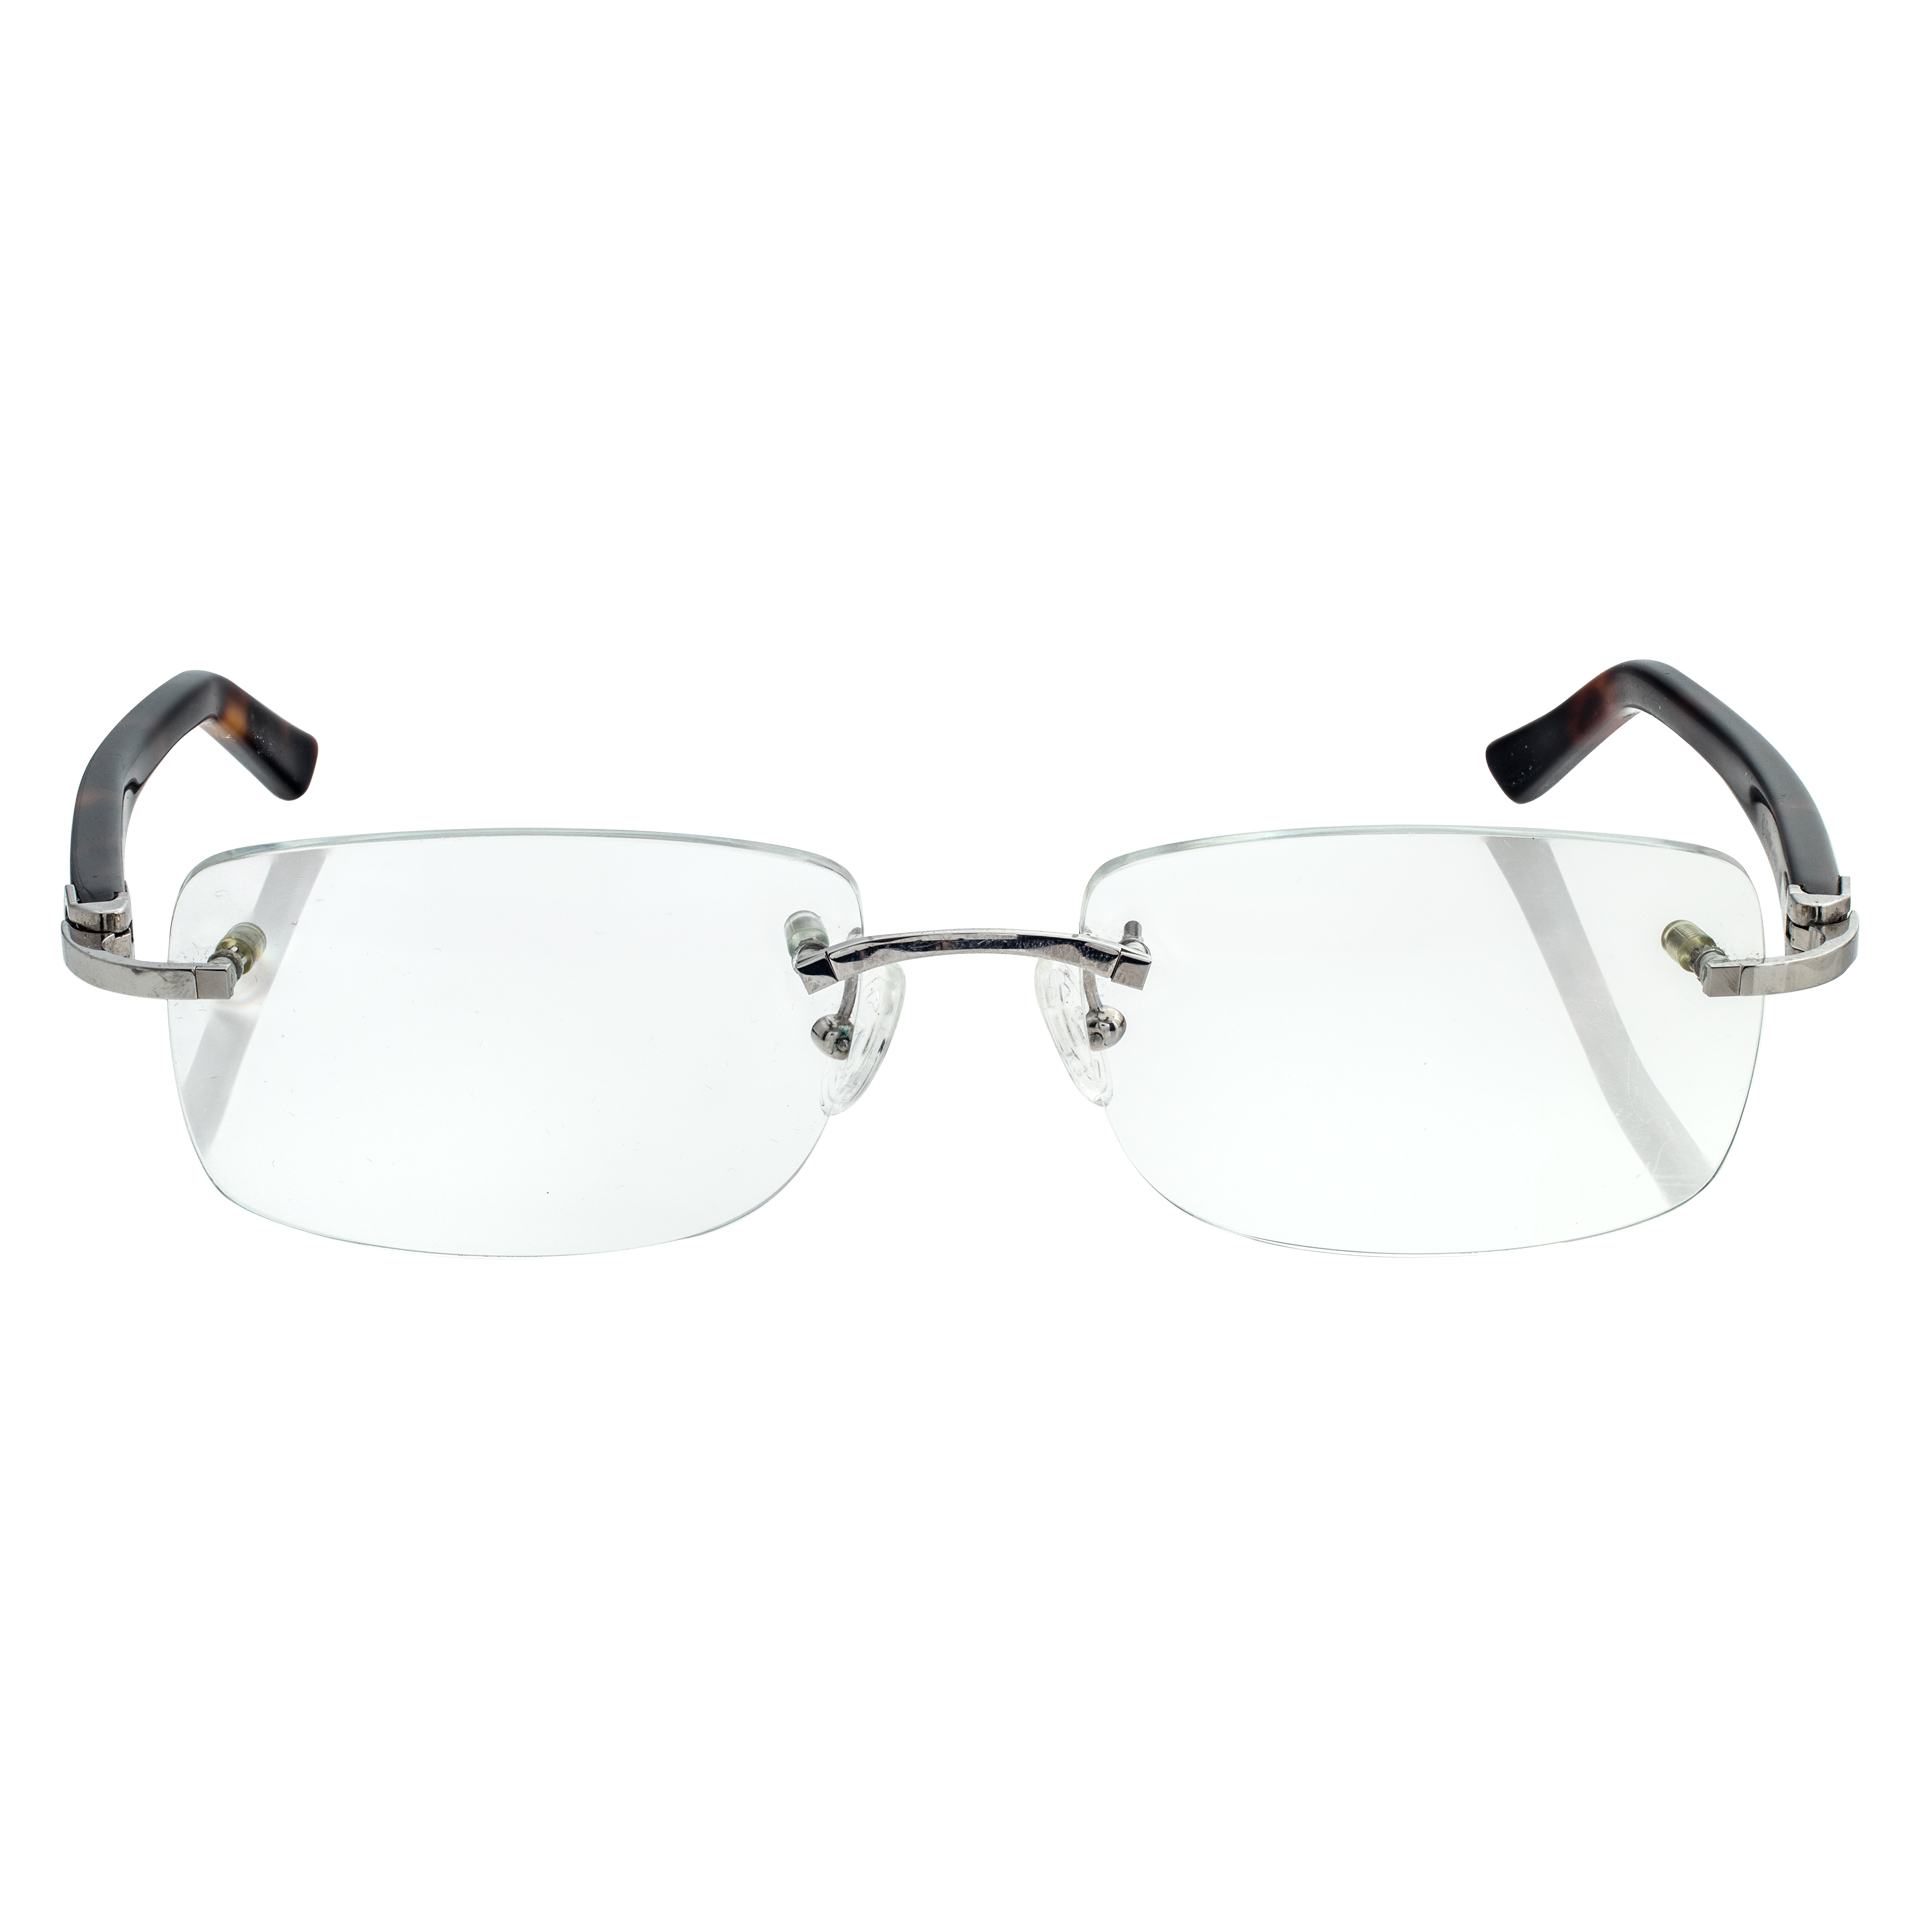 Cartier rimless eyeglasses with tortoise shell temples